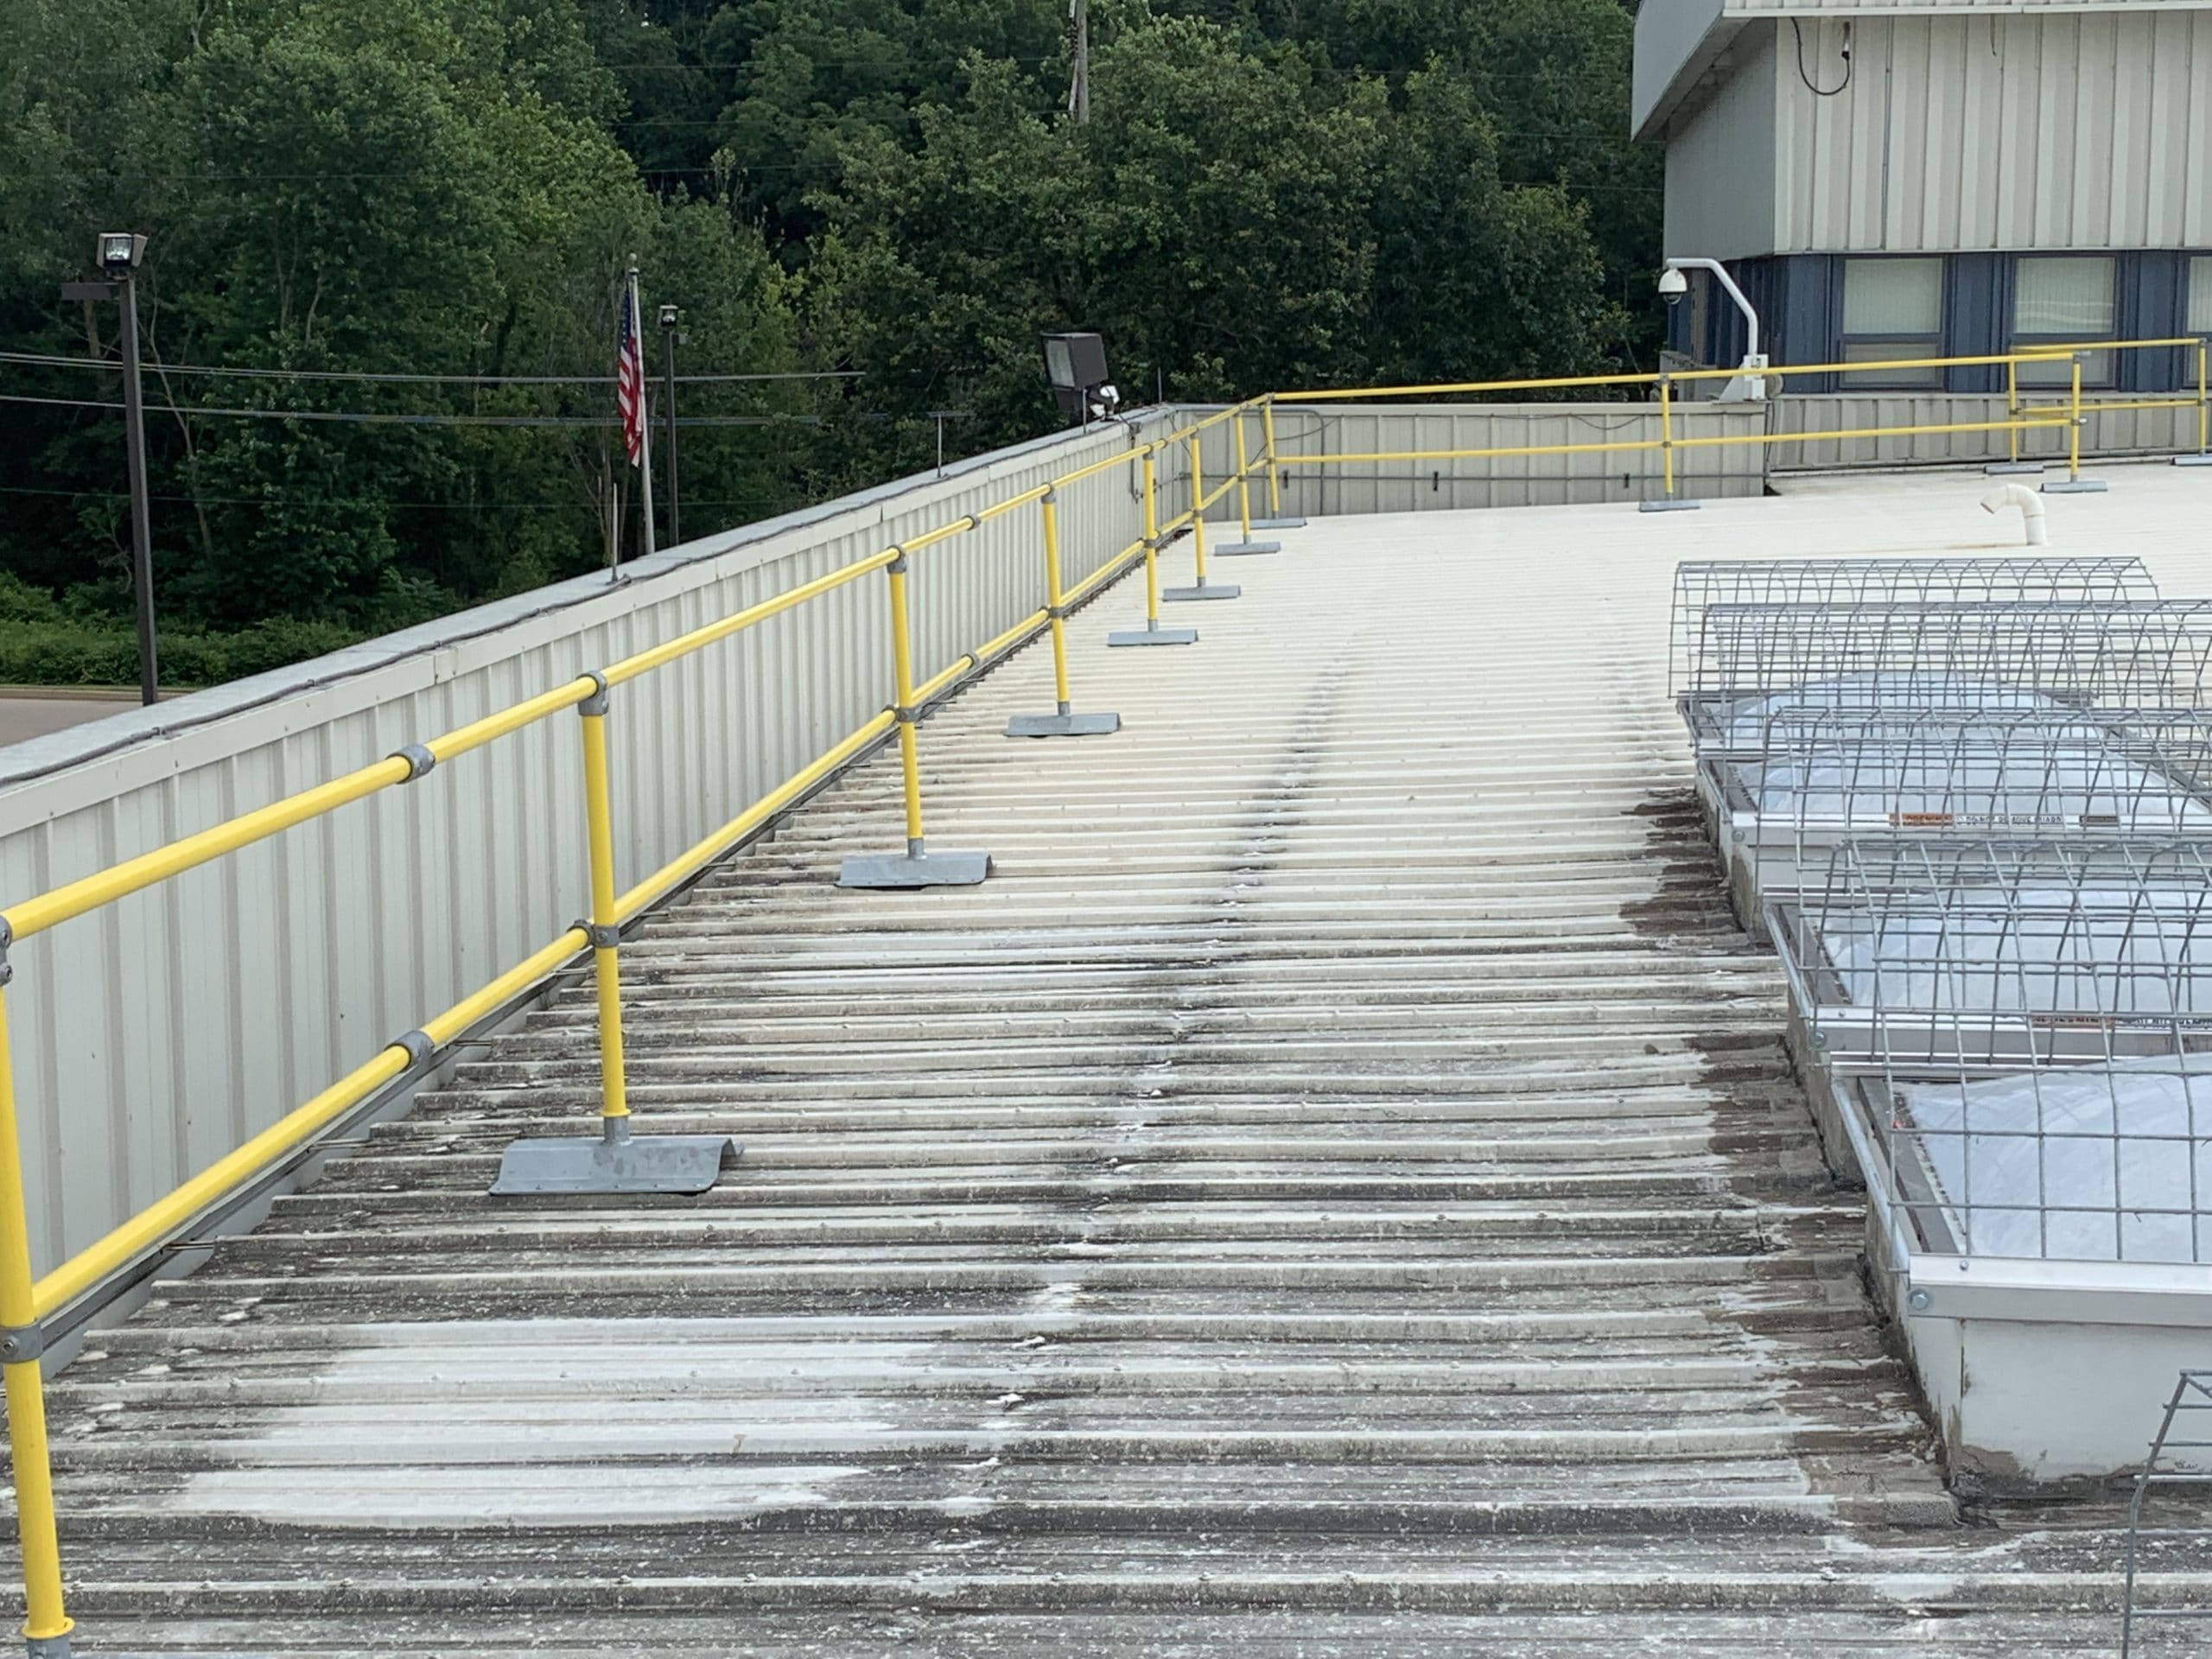 Metal Roof Safety Rail - EDGE Fall Protection LLC